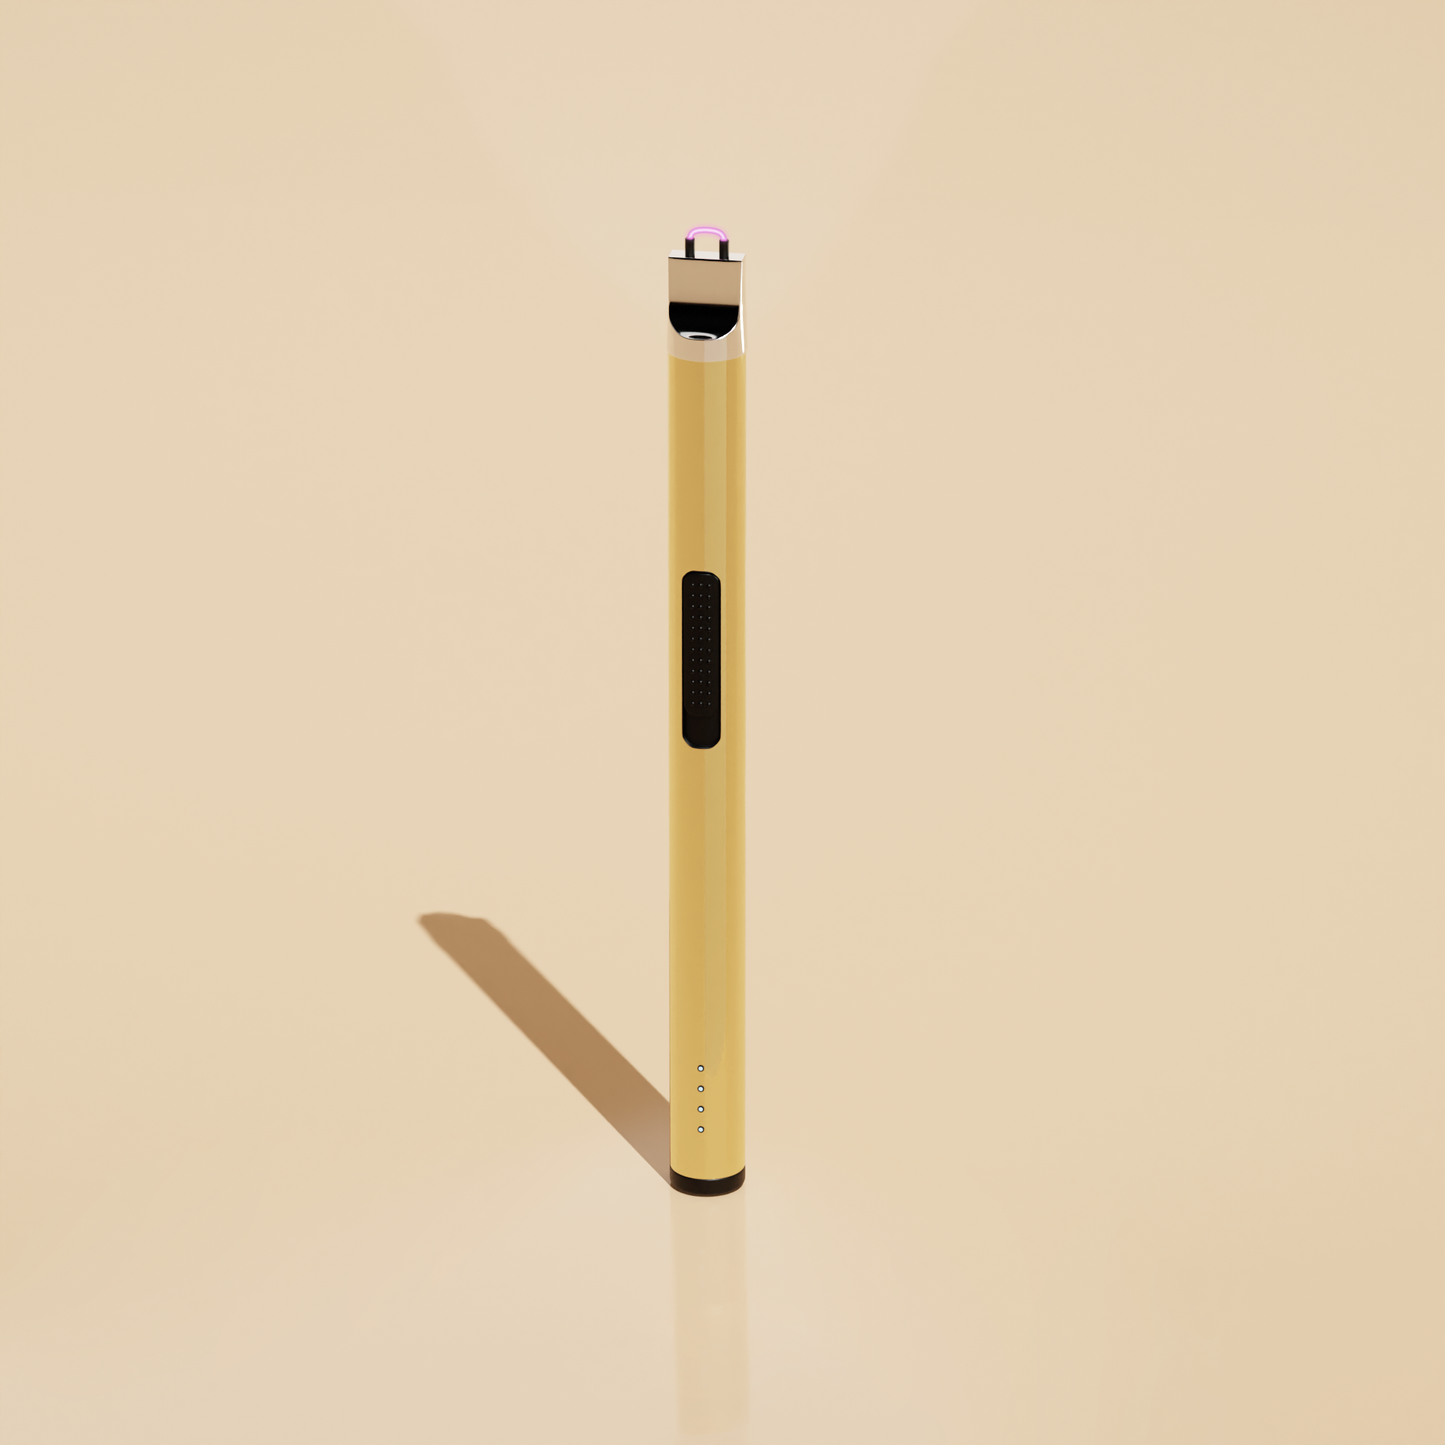 Luna_and_Lo._The_Label_Gold_Electic_Lighter